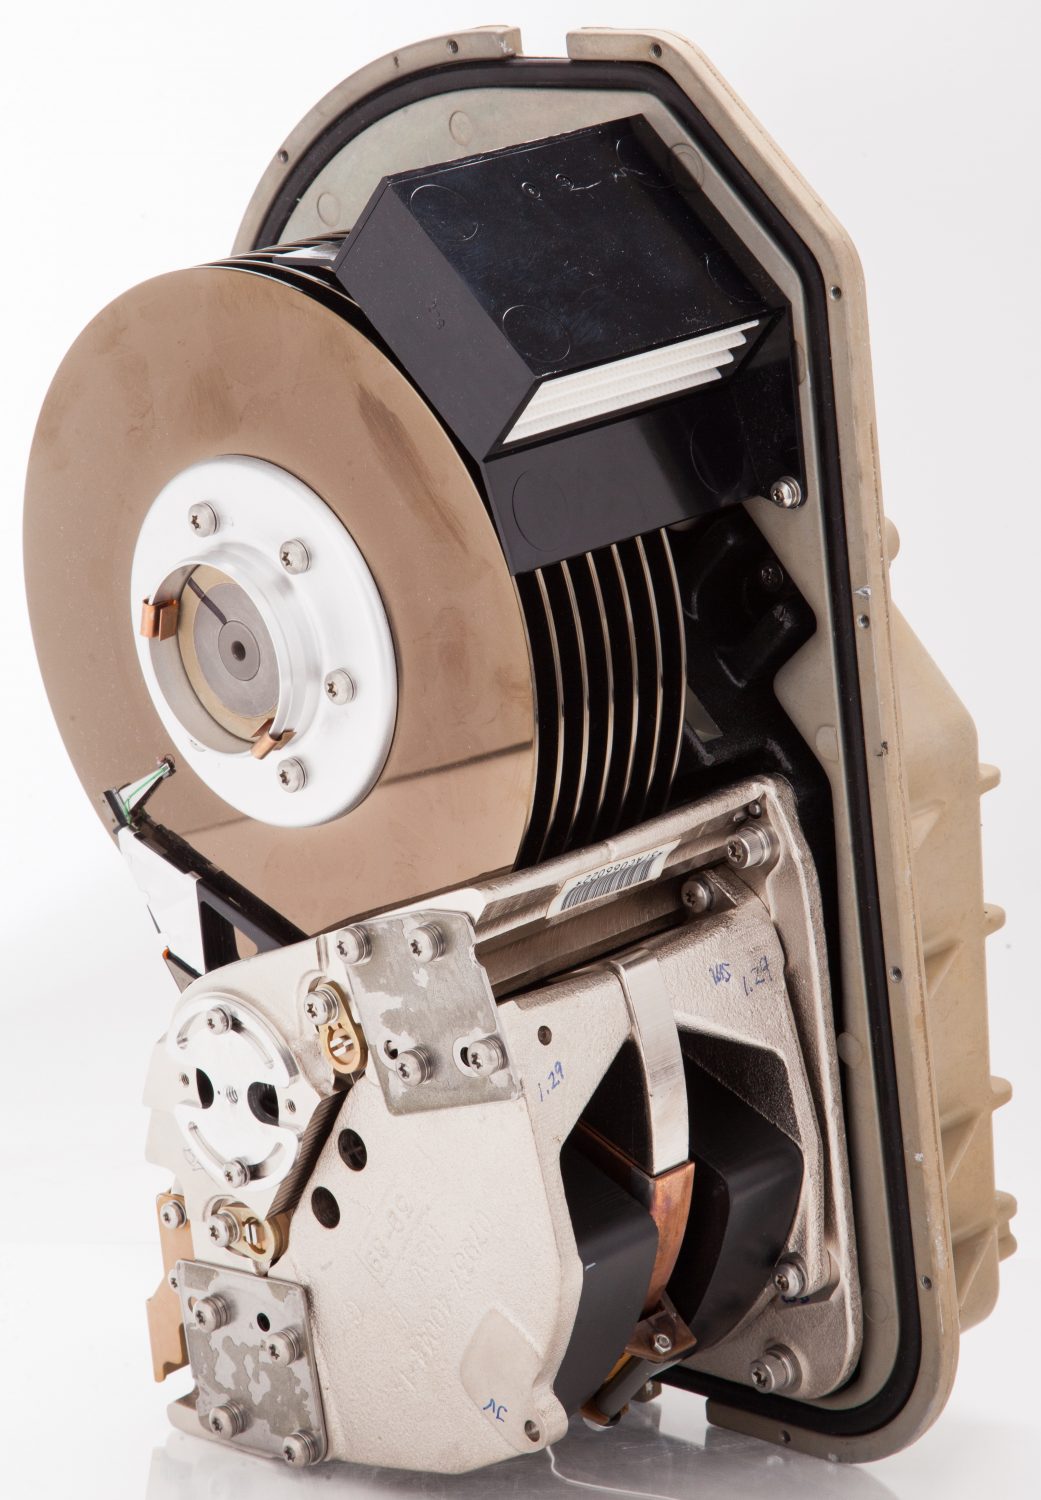 Photo of the HP 9737 Storage Disk Drive.